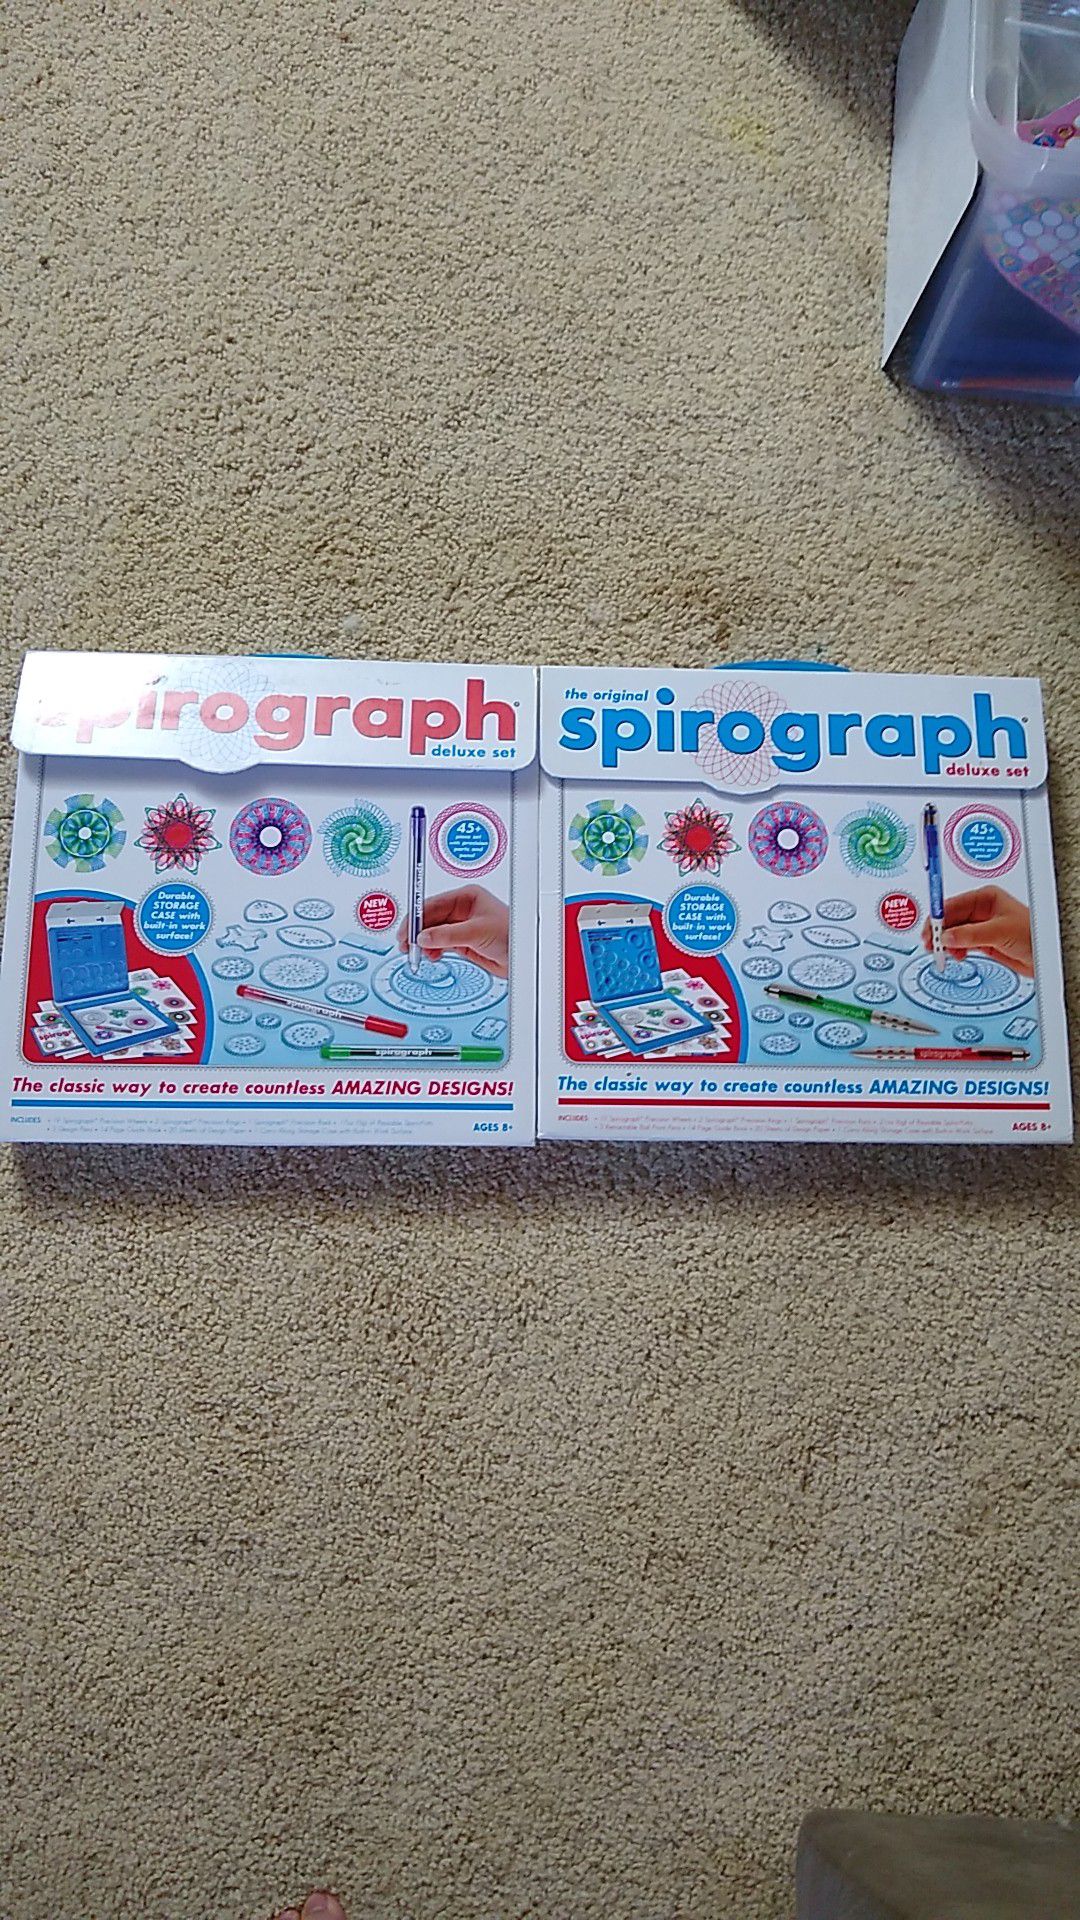 2 spirograph deluxe sets